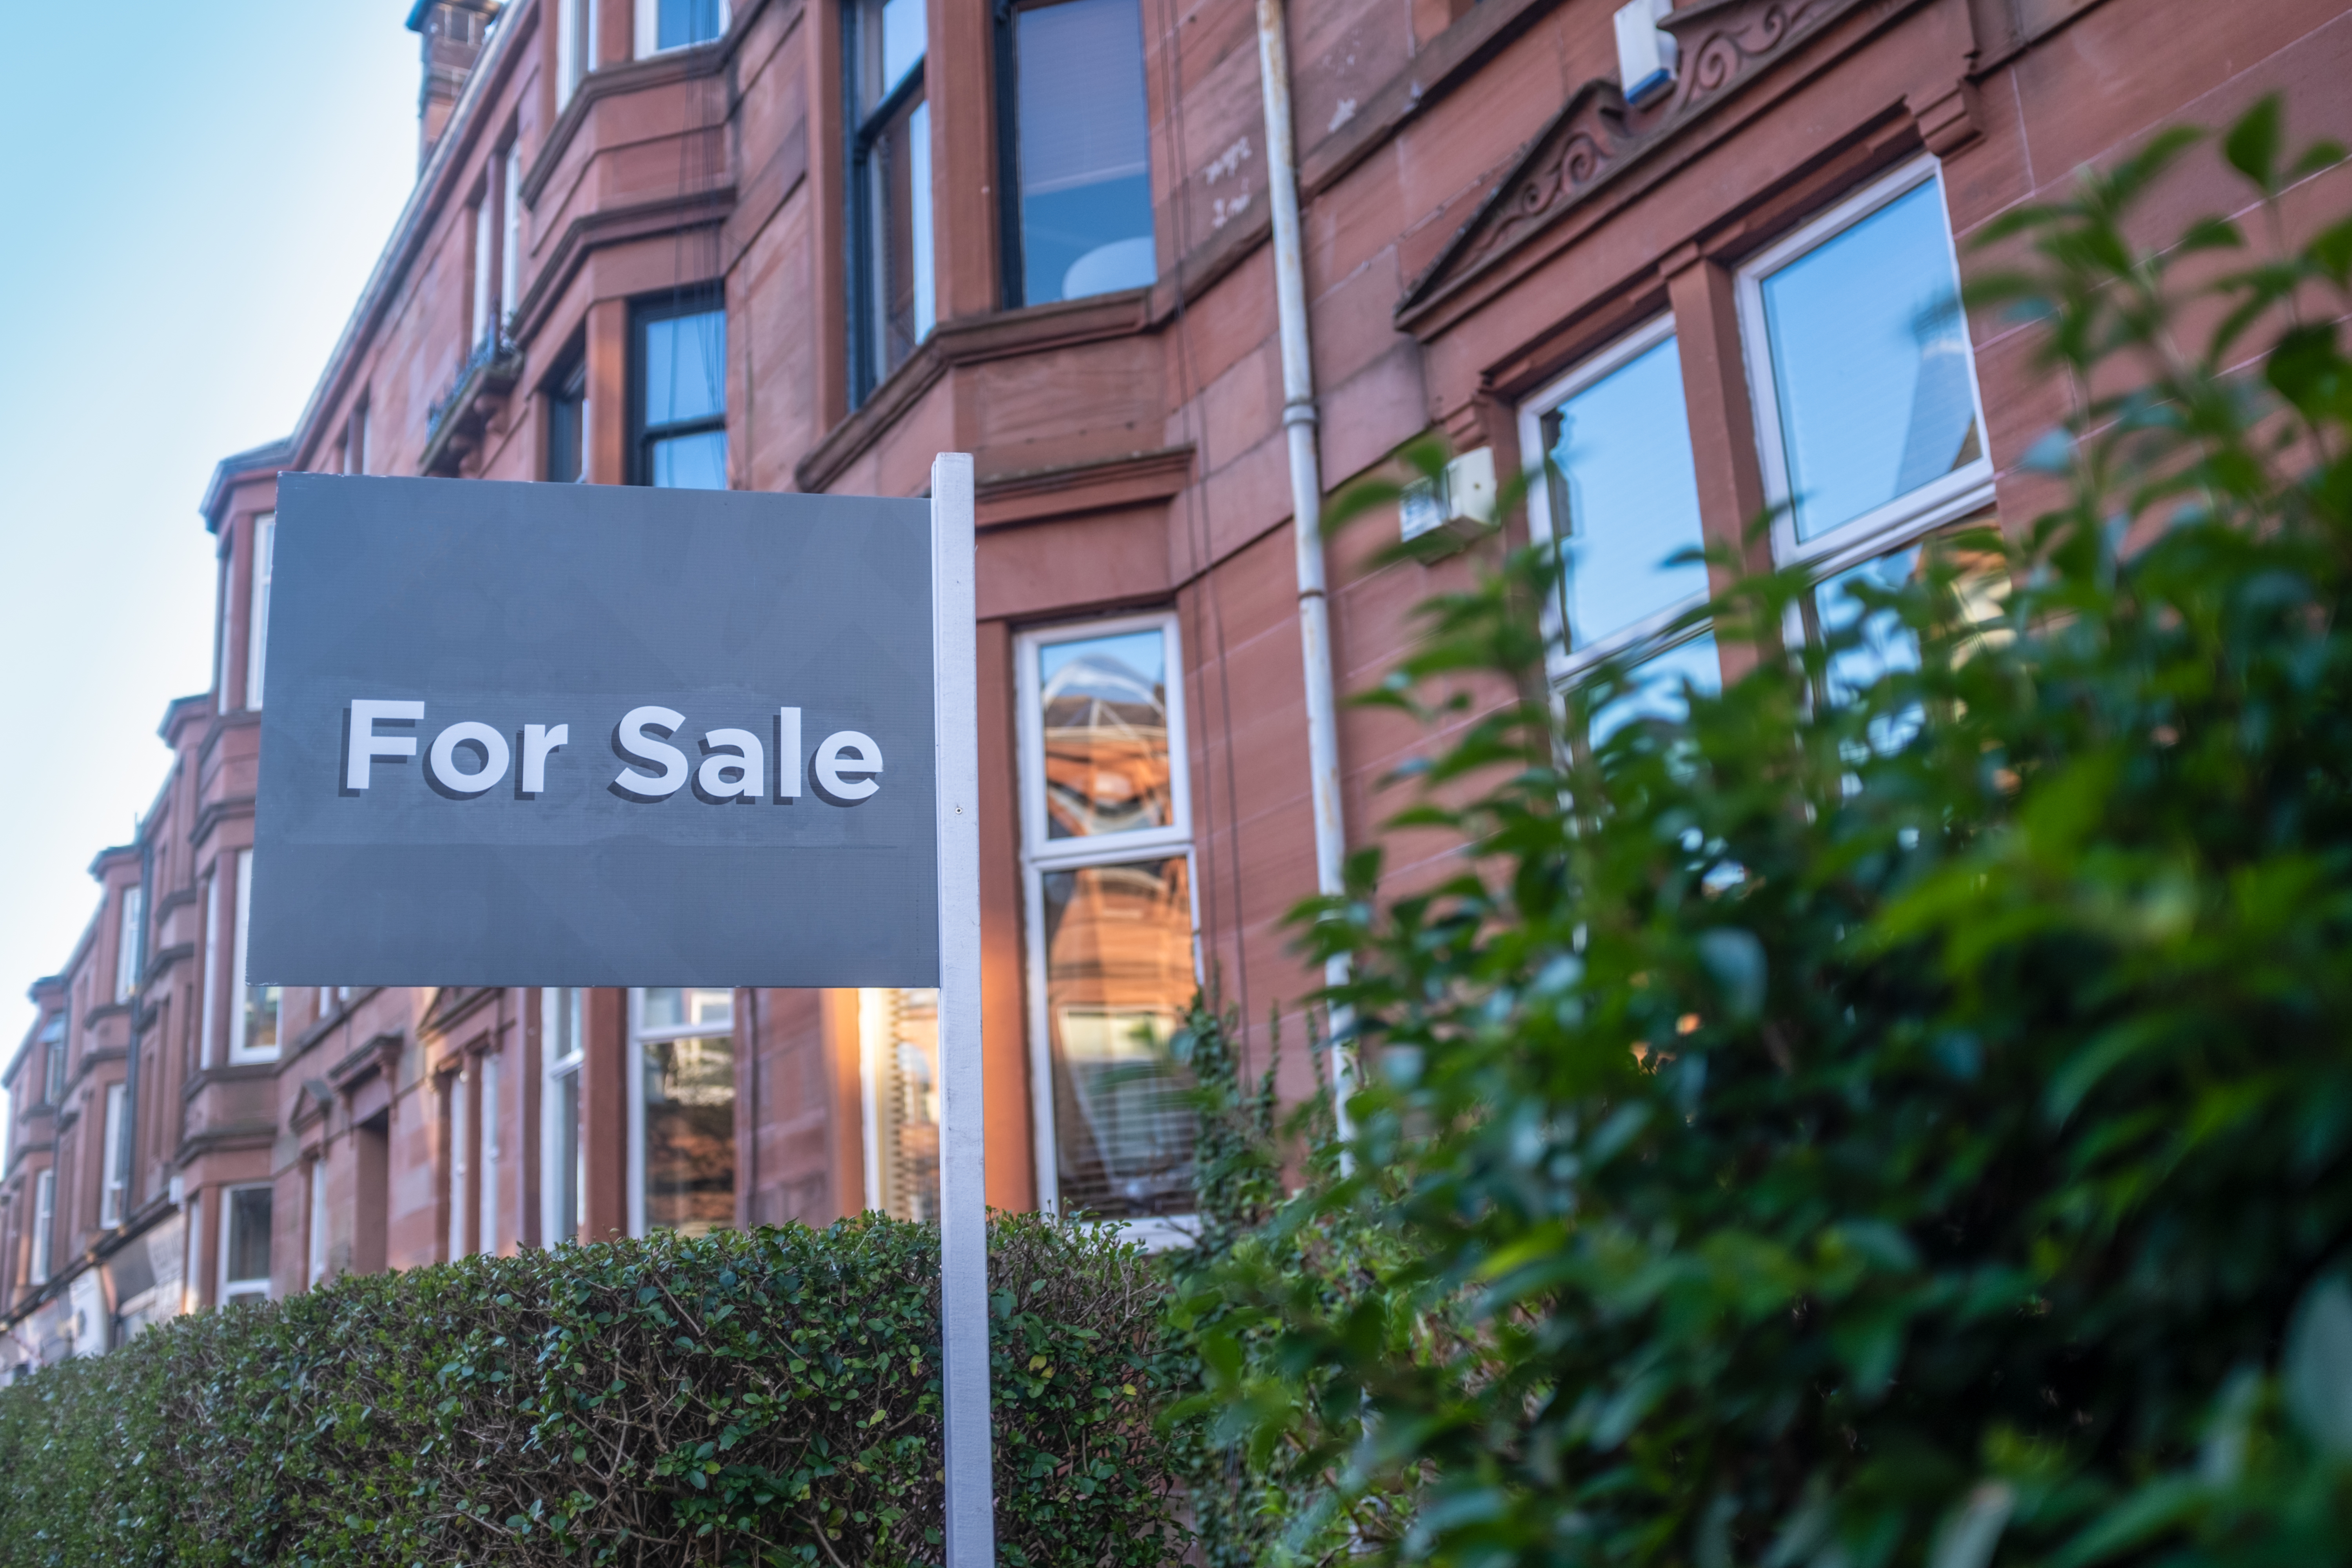 The Costs of Selling Your House Explained